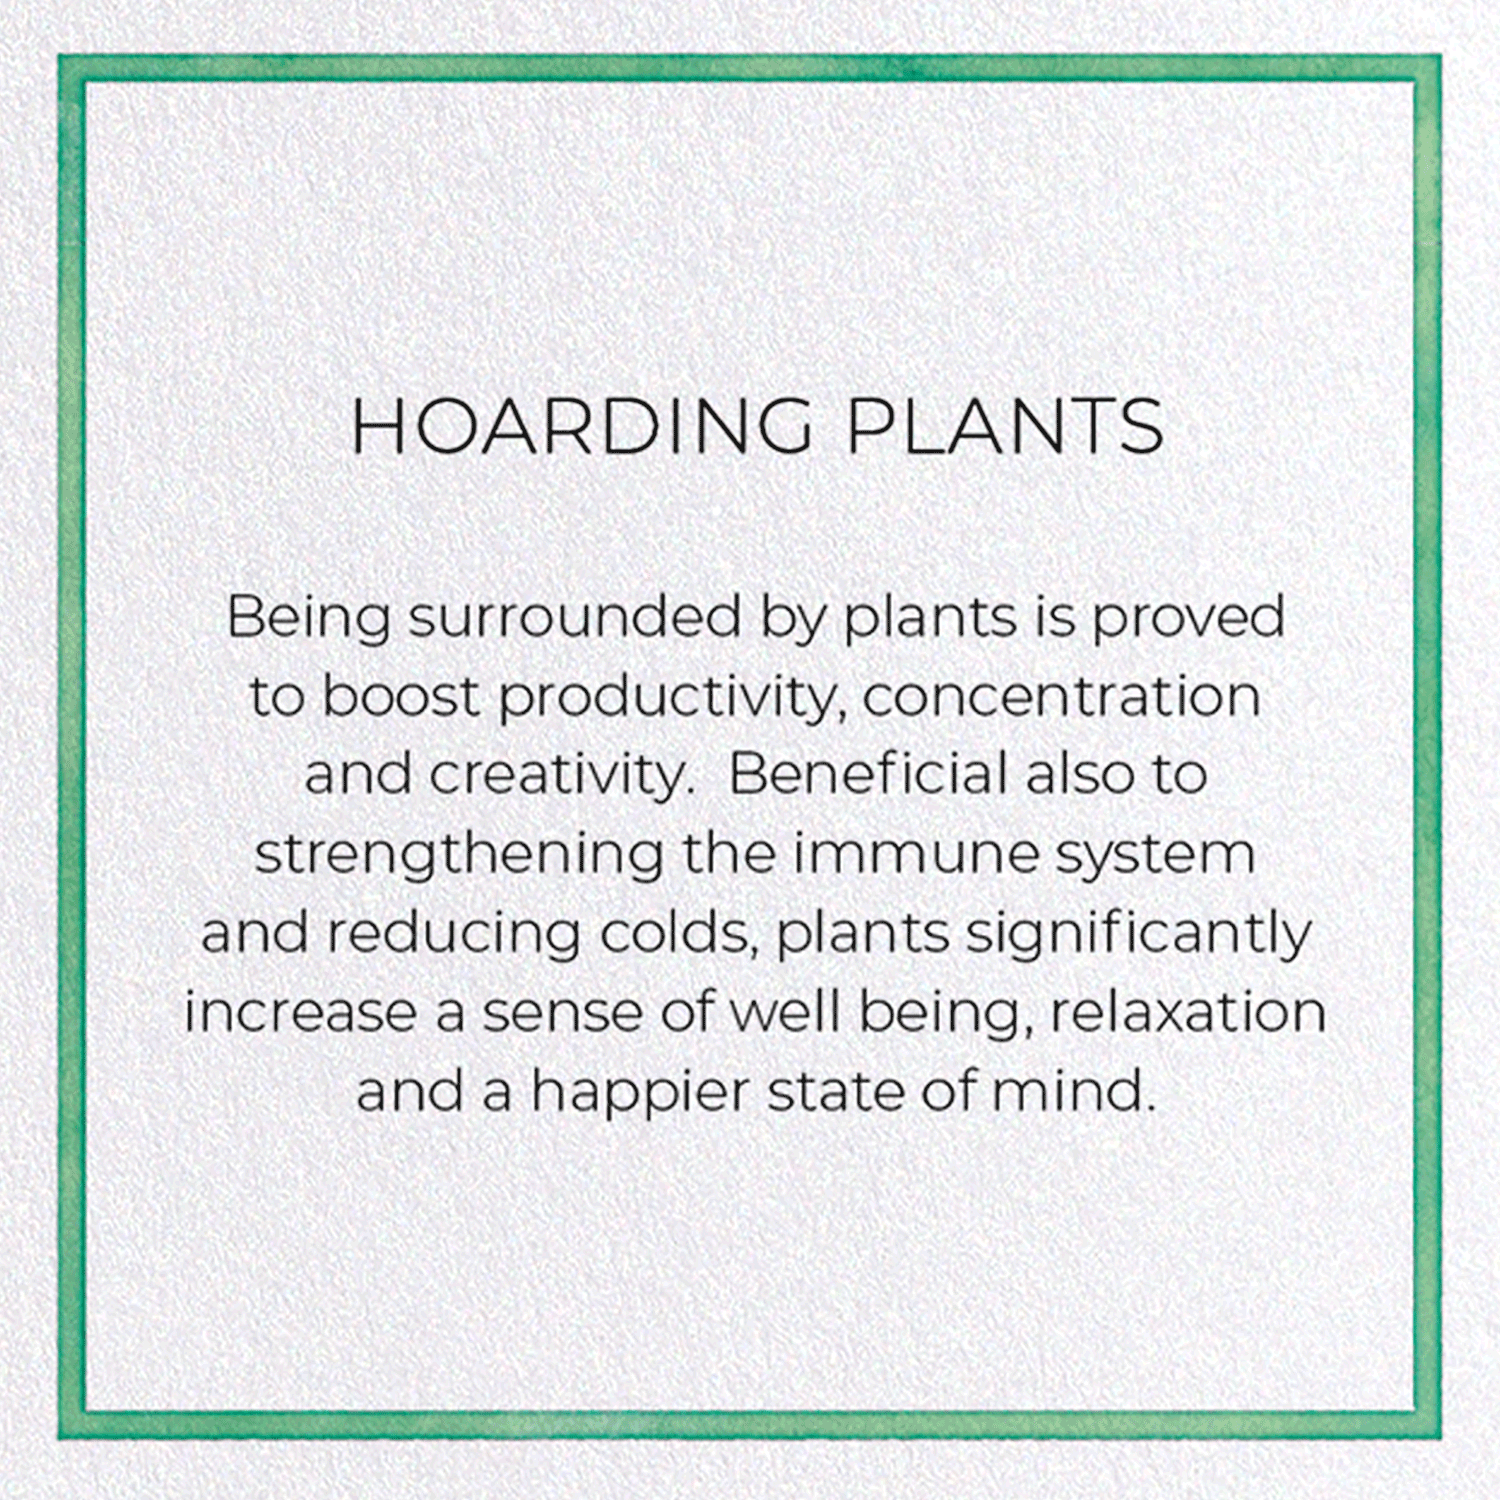 HOARDING PLANTS: Watercolour Greeting Card